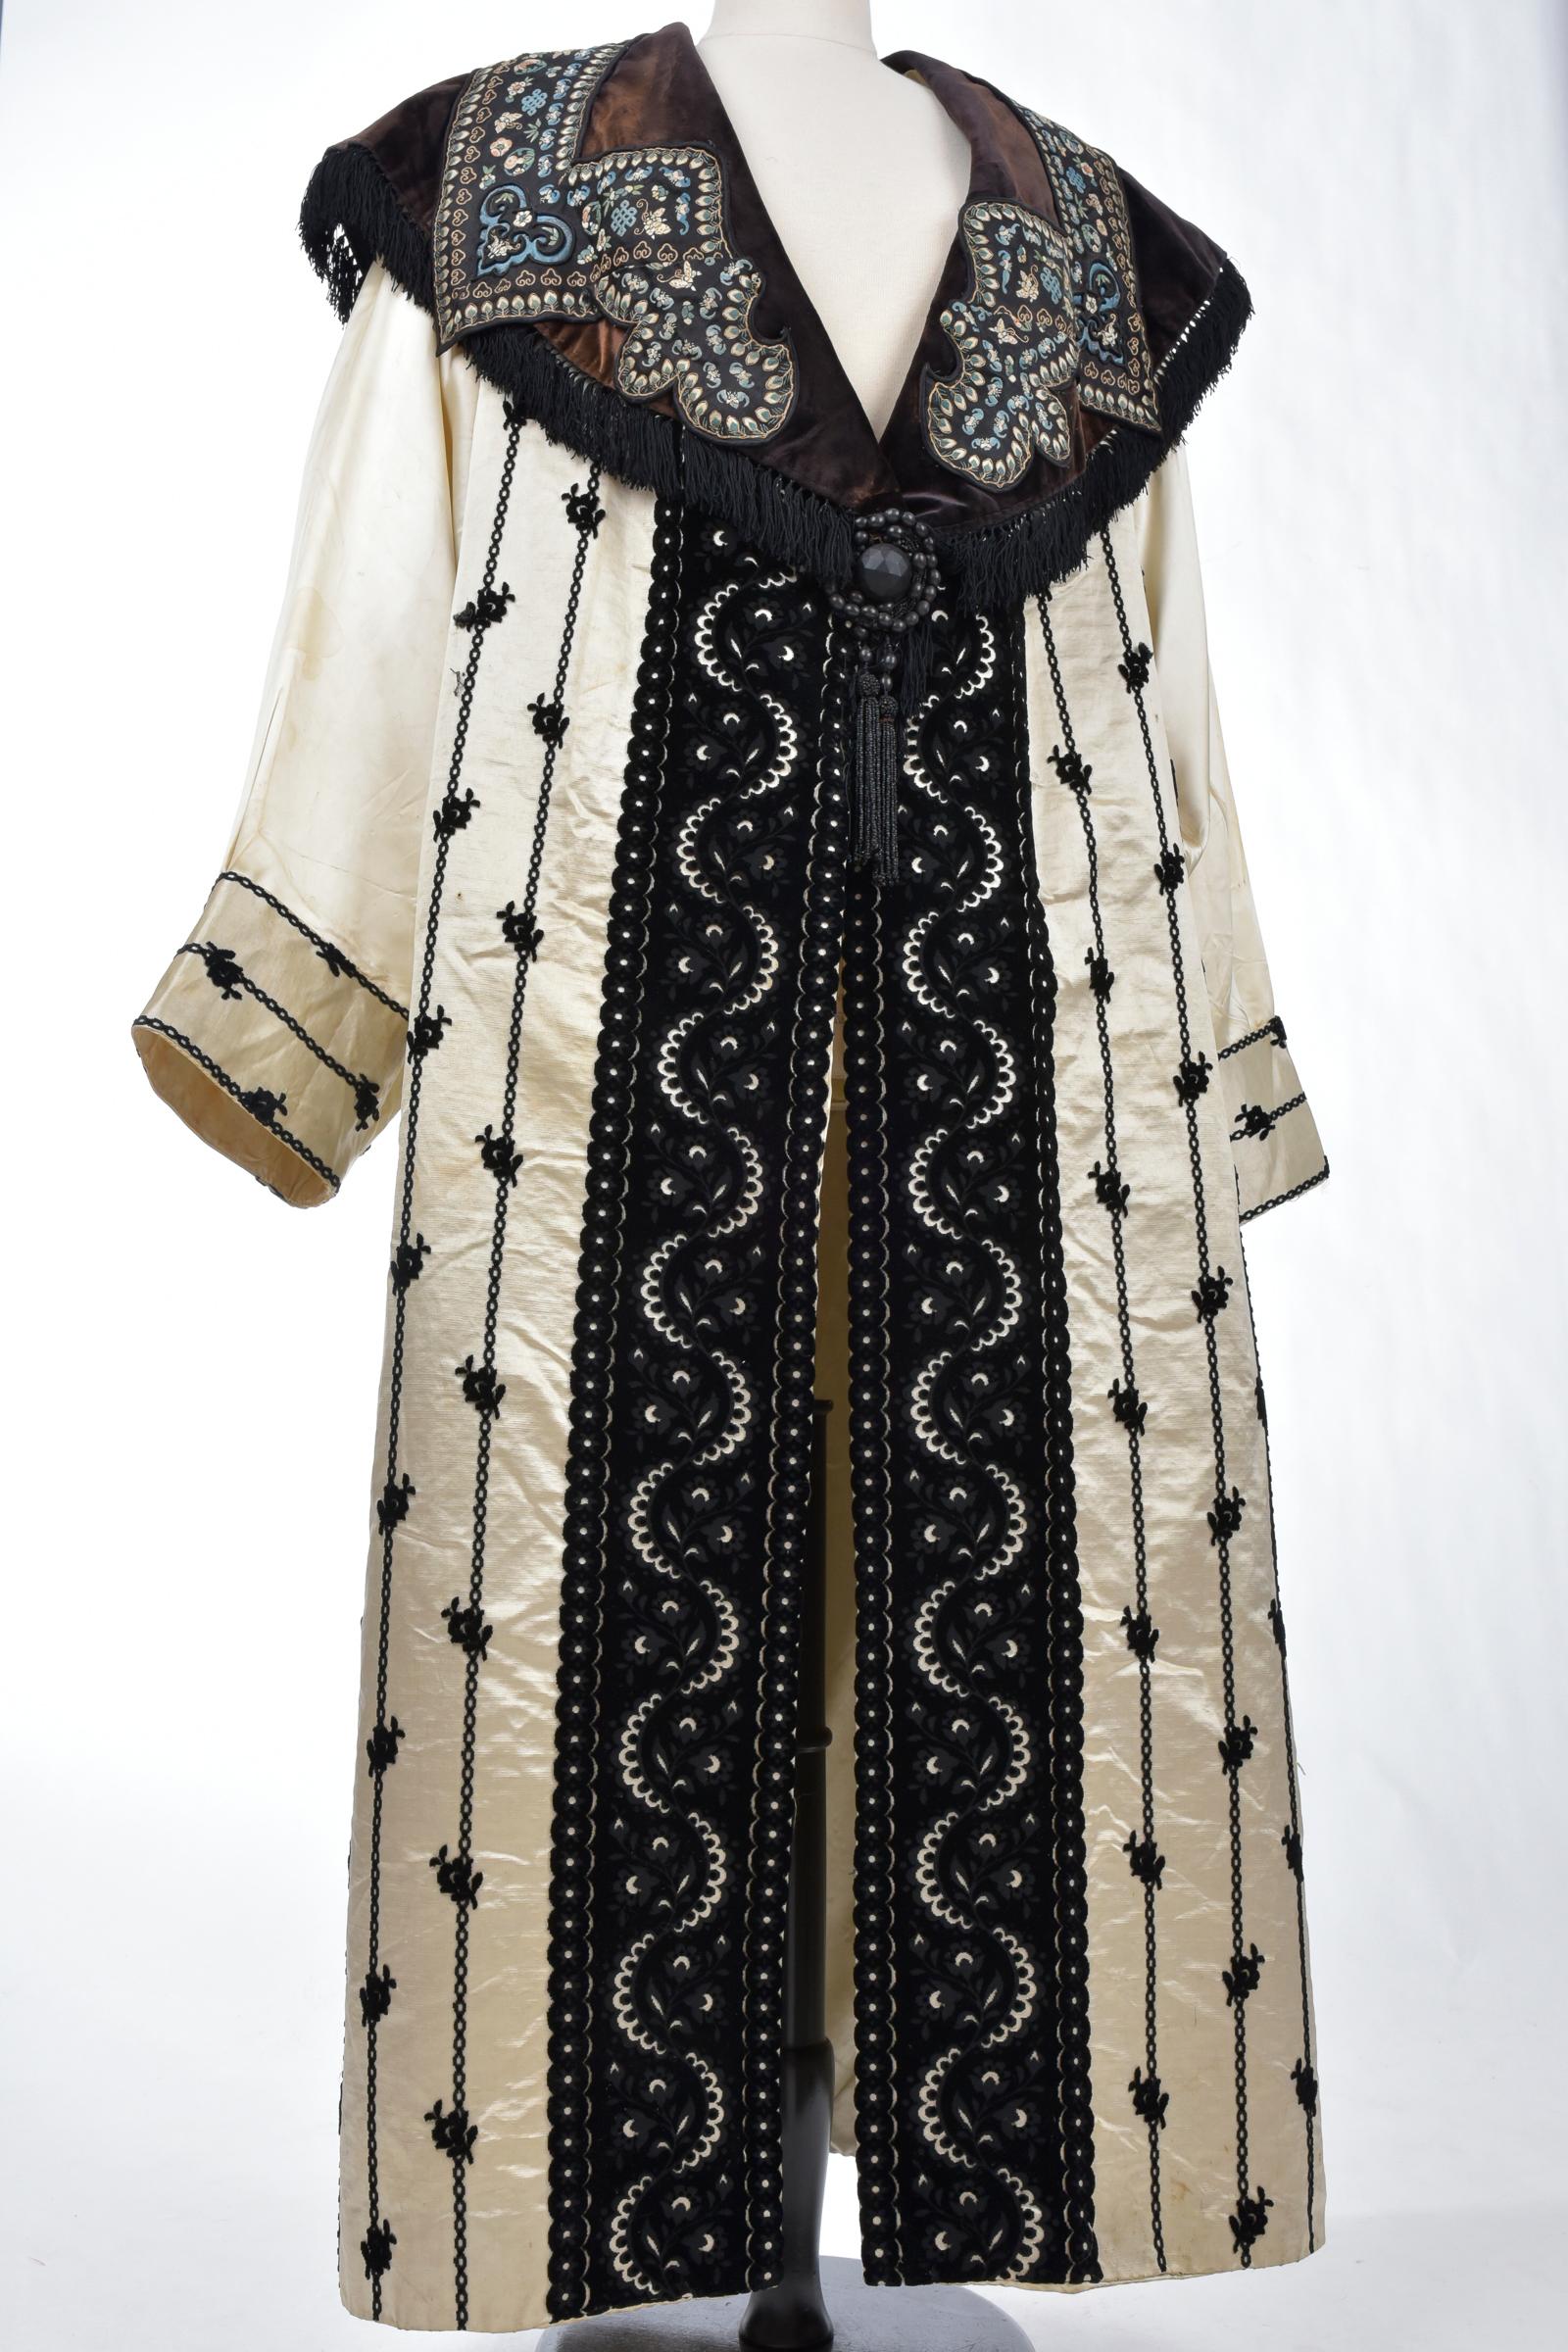 Evening coat in velvet brocaded satin and Qing embroidery  - France Circa 1915 4